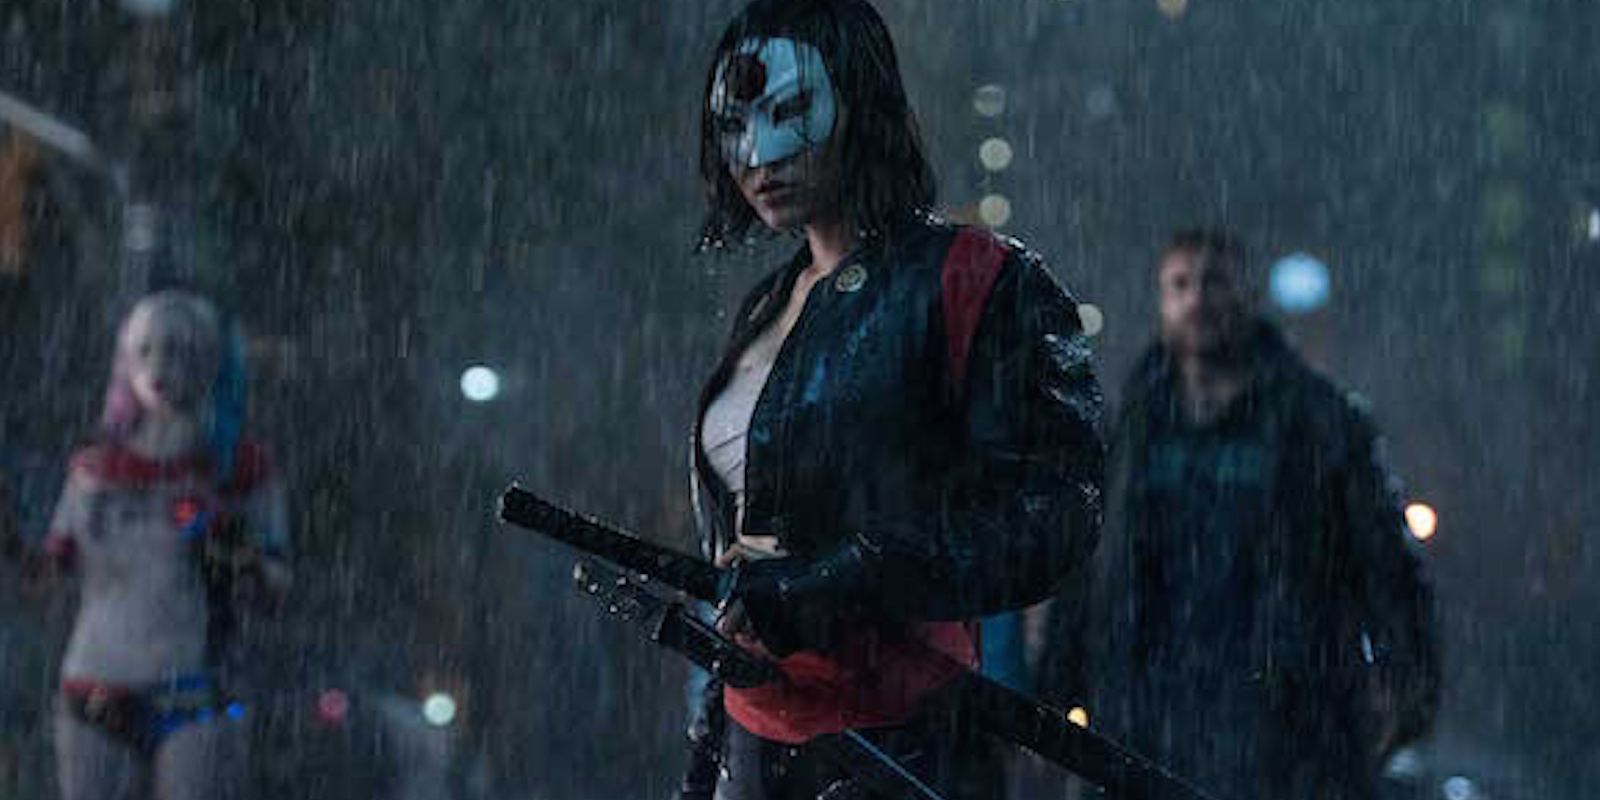 Katana stands in the rain in Suicide Squad